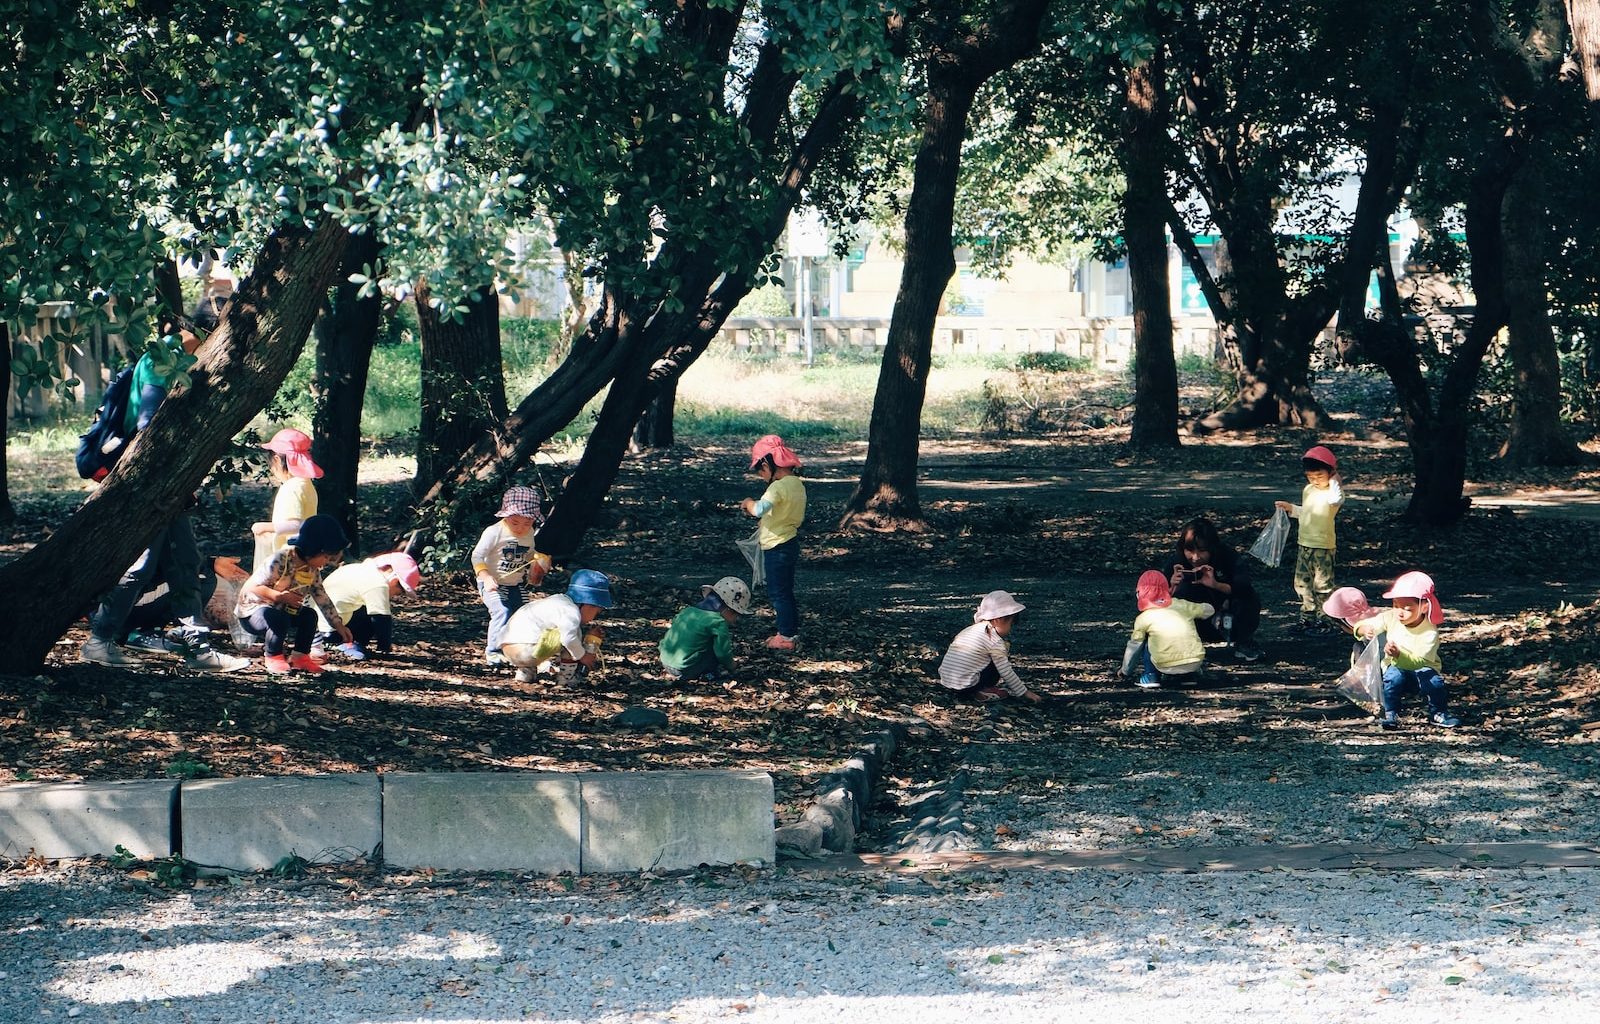 people sitting on concrete bench near trees during daytime